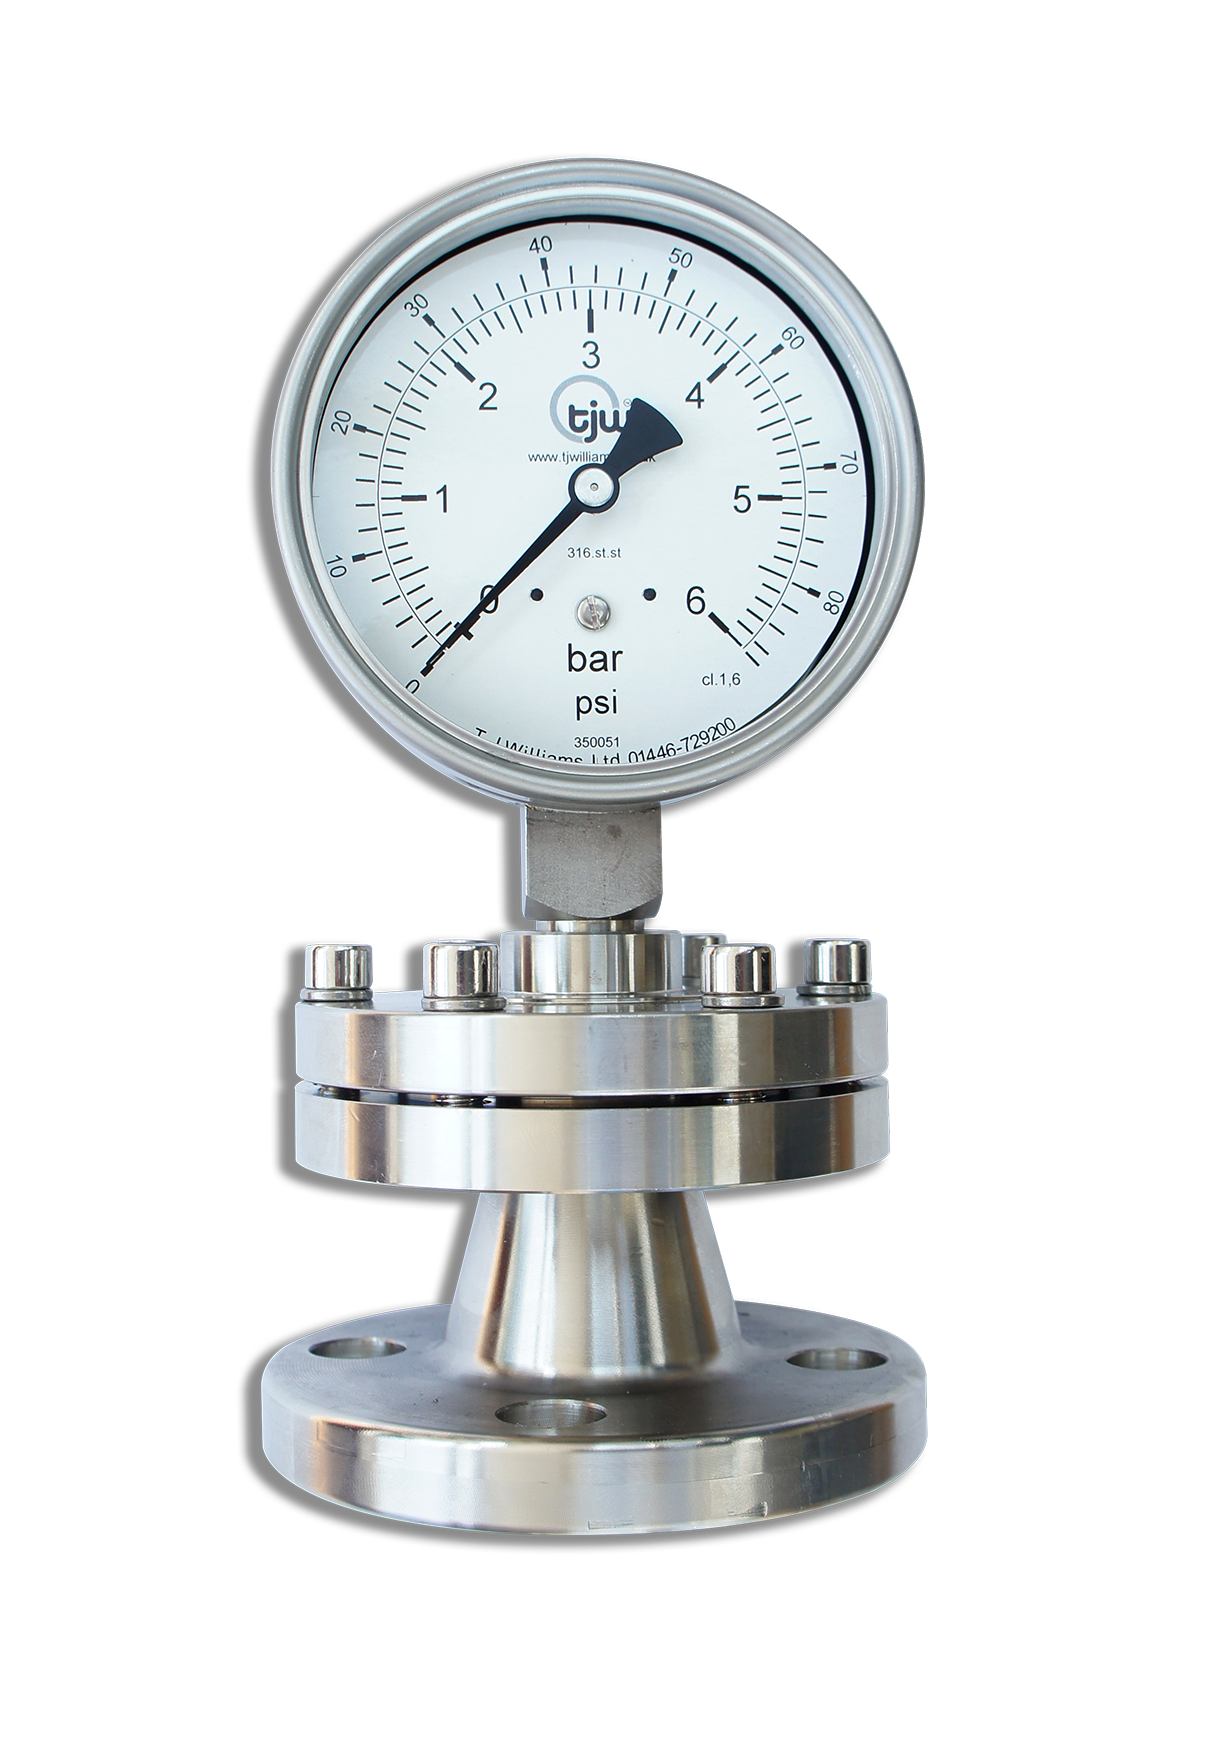 Bolted Flanged Diaphragm Seal Gauge